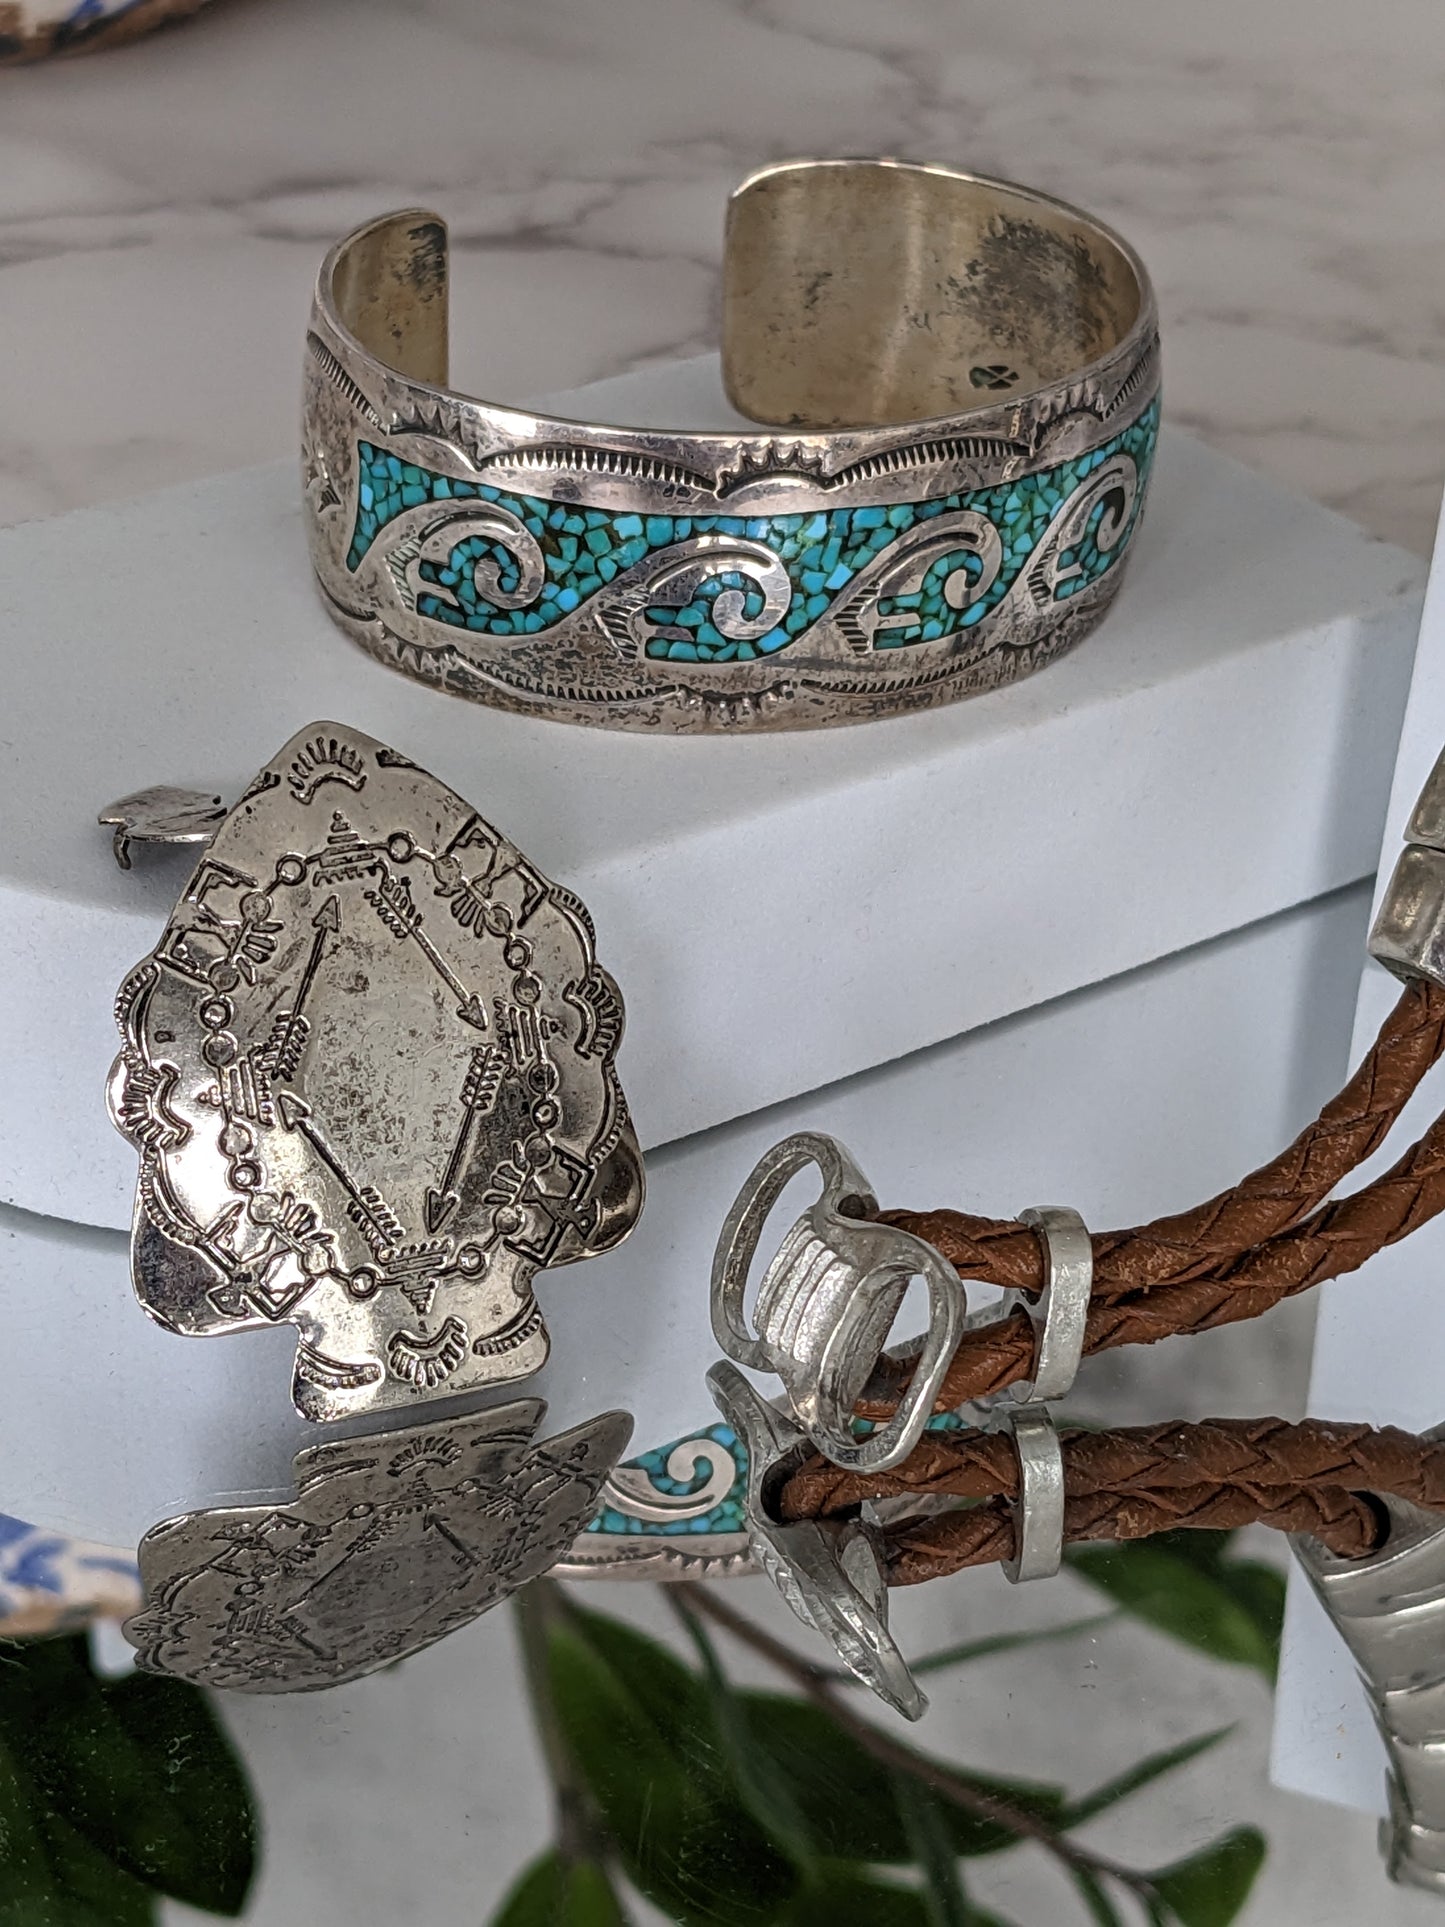 Hand Made Silver and Turquoise Jewelry Pieces